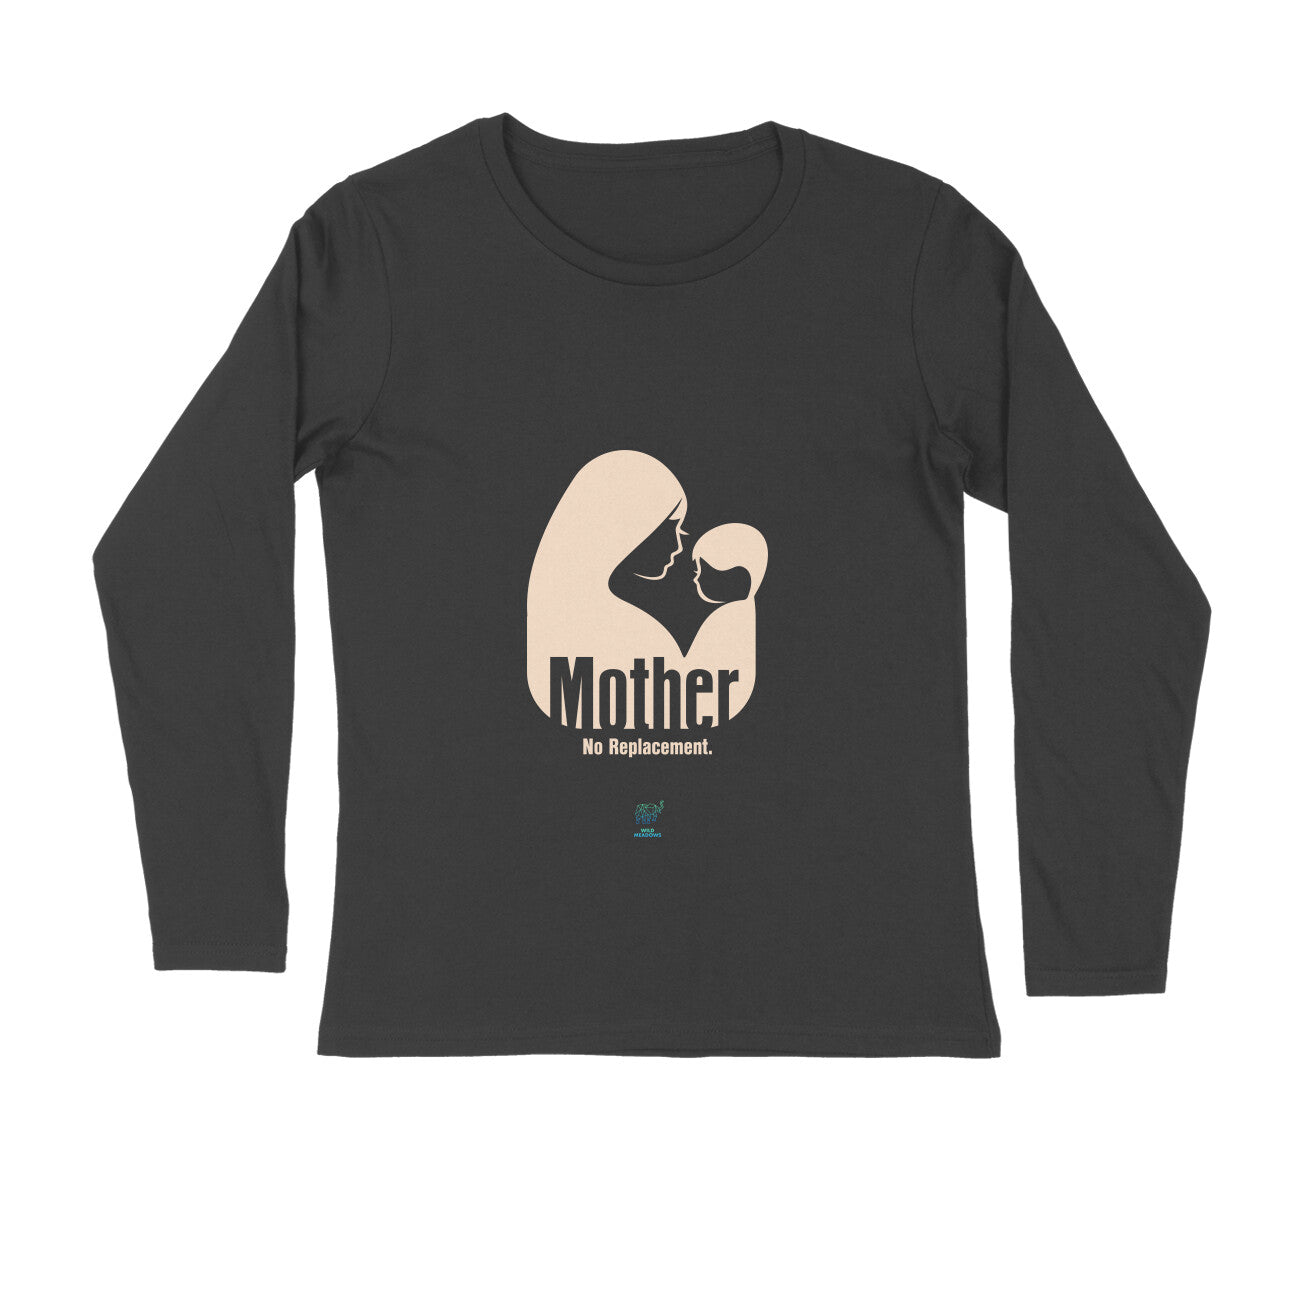 MOM - Mother no replacement - Long Sleeve Round Neck Unisex Tee